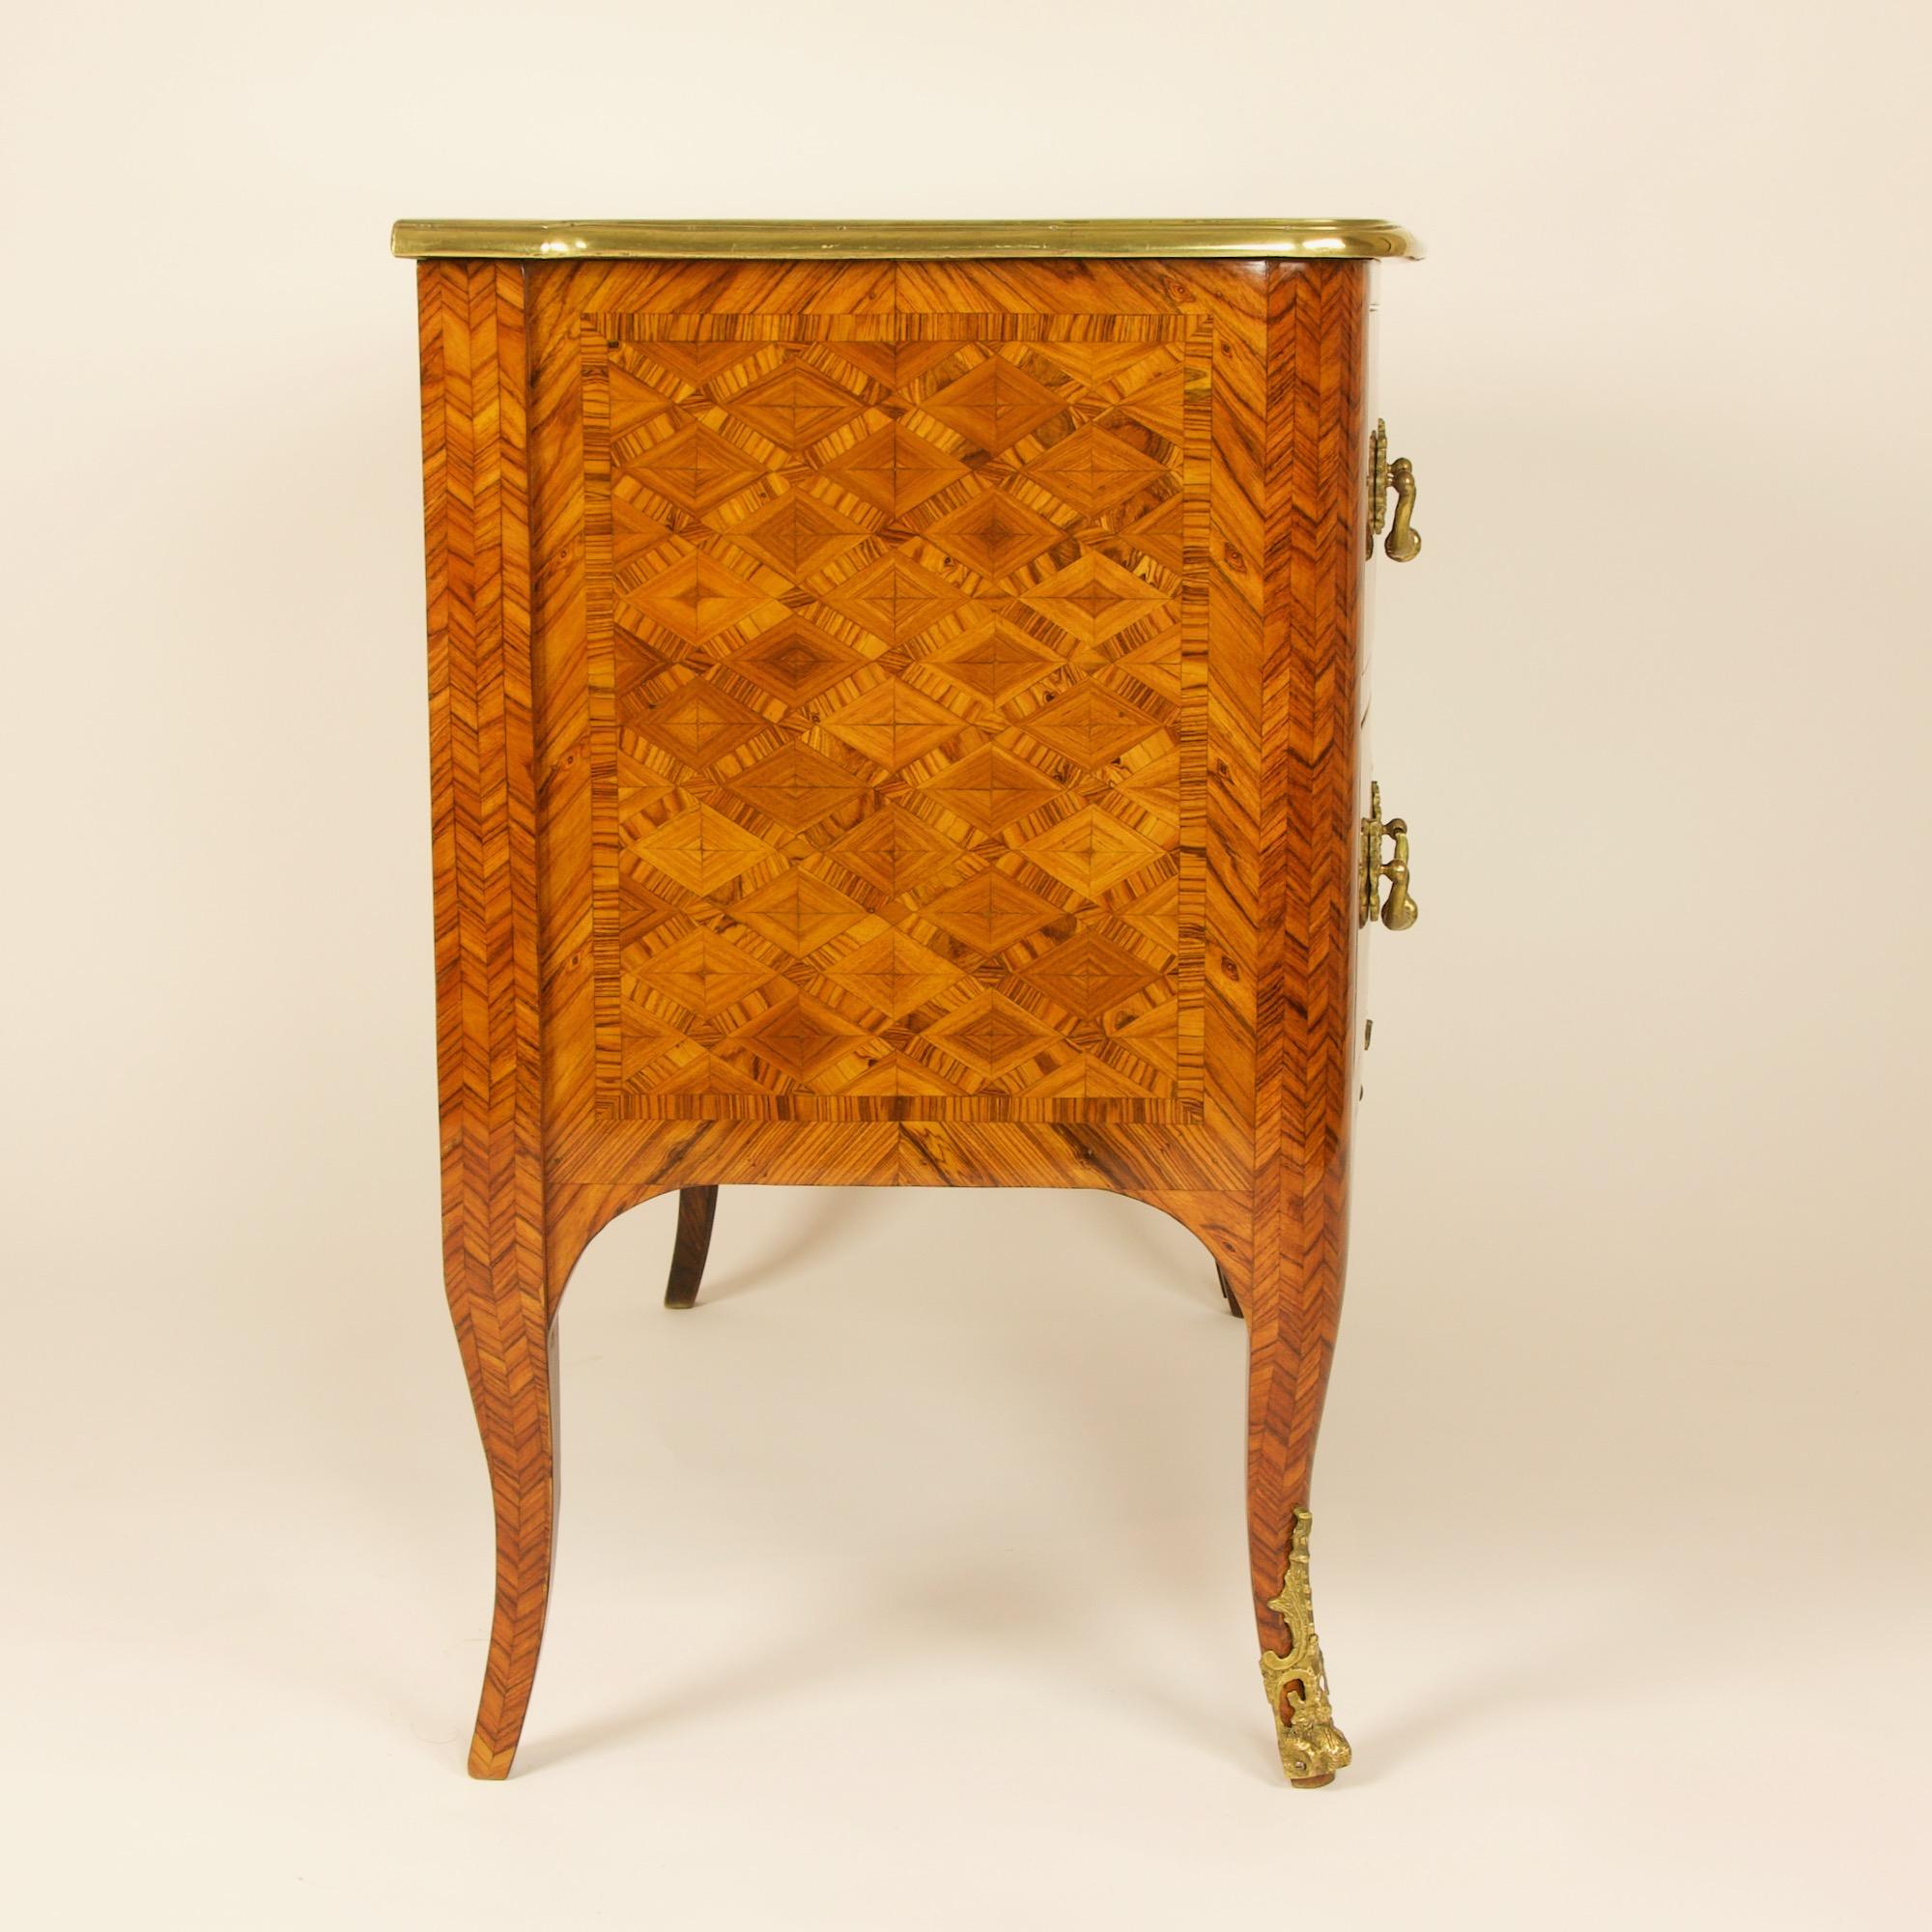 19th Century French Louis XIV Régence Trelliswork Marquetry Commode or Sauteuse In Good Condition For Sale In Berlin, DE